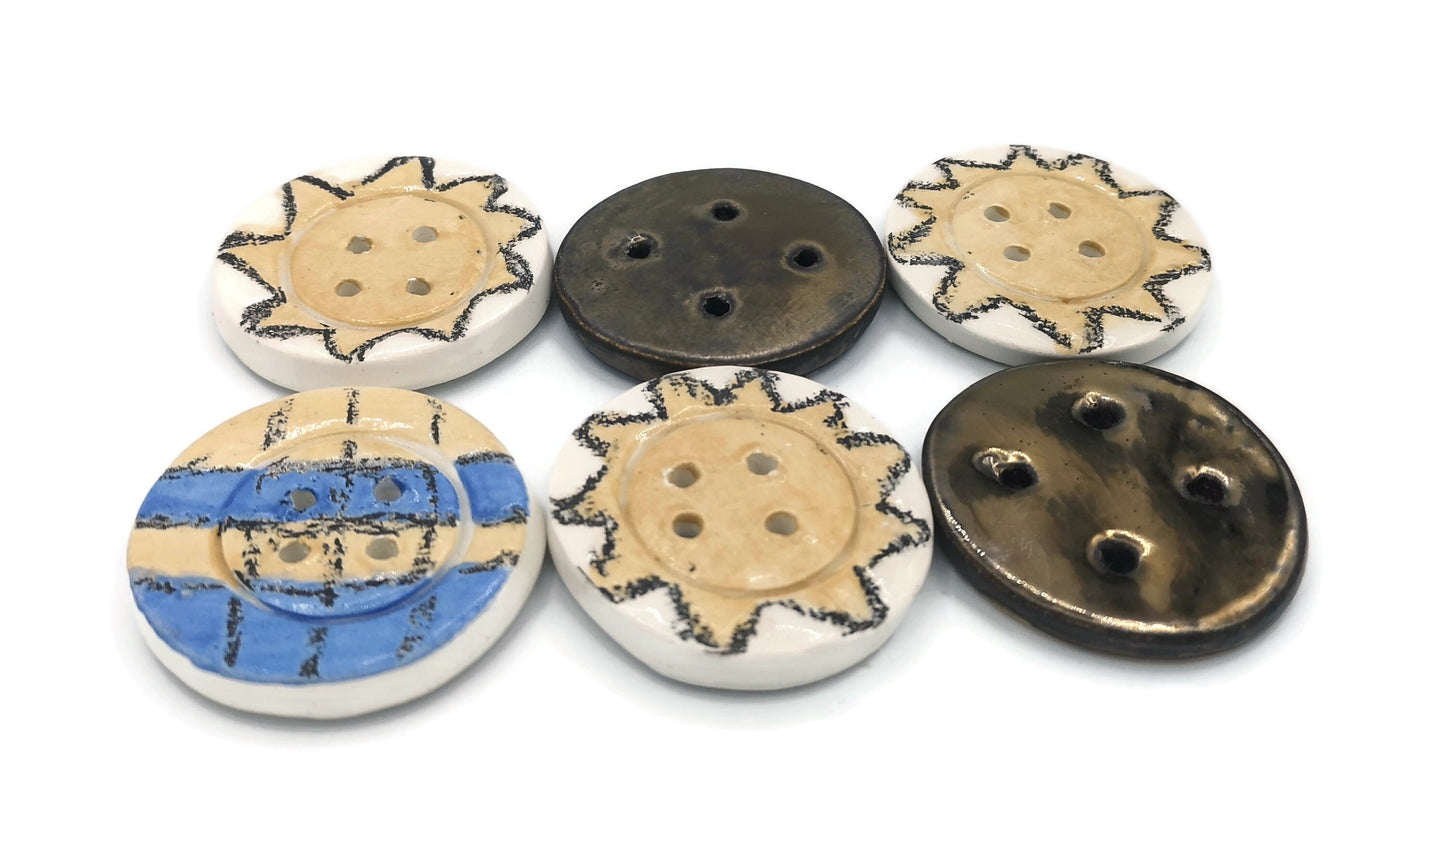 Set Of 6 Hand Painted Flat Buttons, Sun Buttons Sewing Supplies And Notions, Handmade Ceramic Strange And Unusual Metal Buttons - Ceramica Ana Rafael